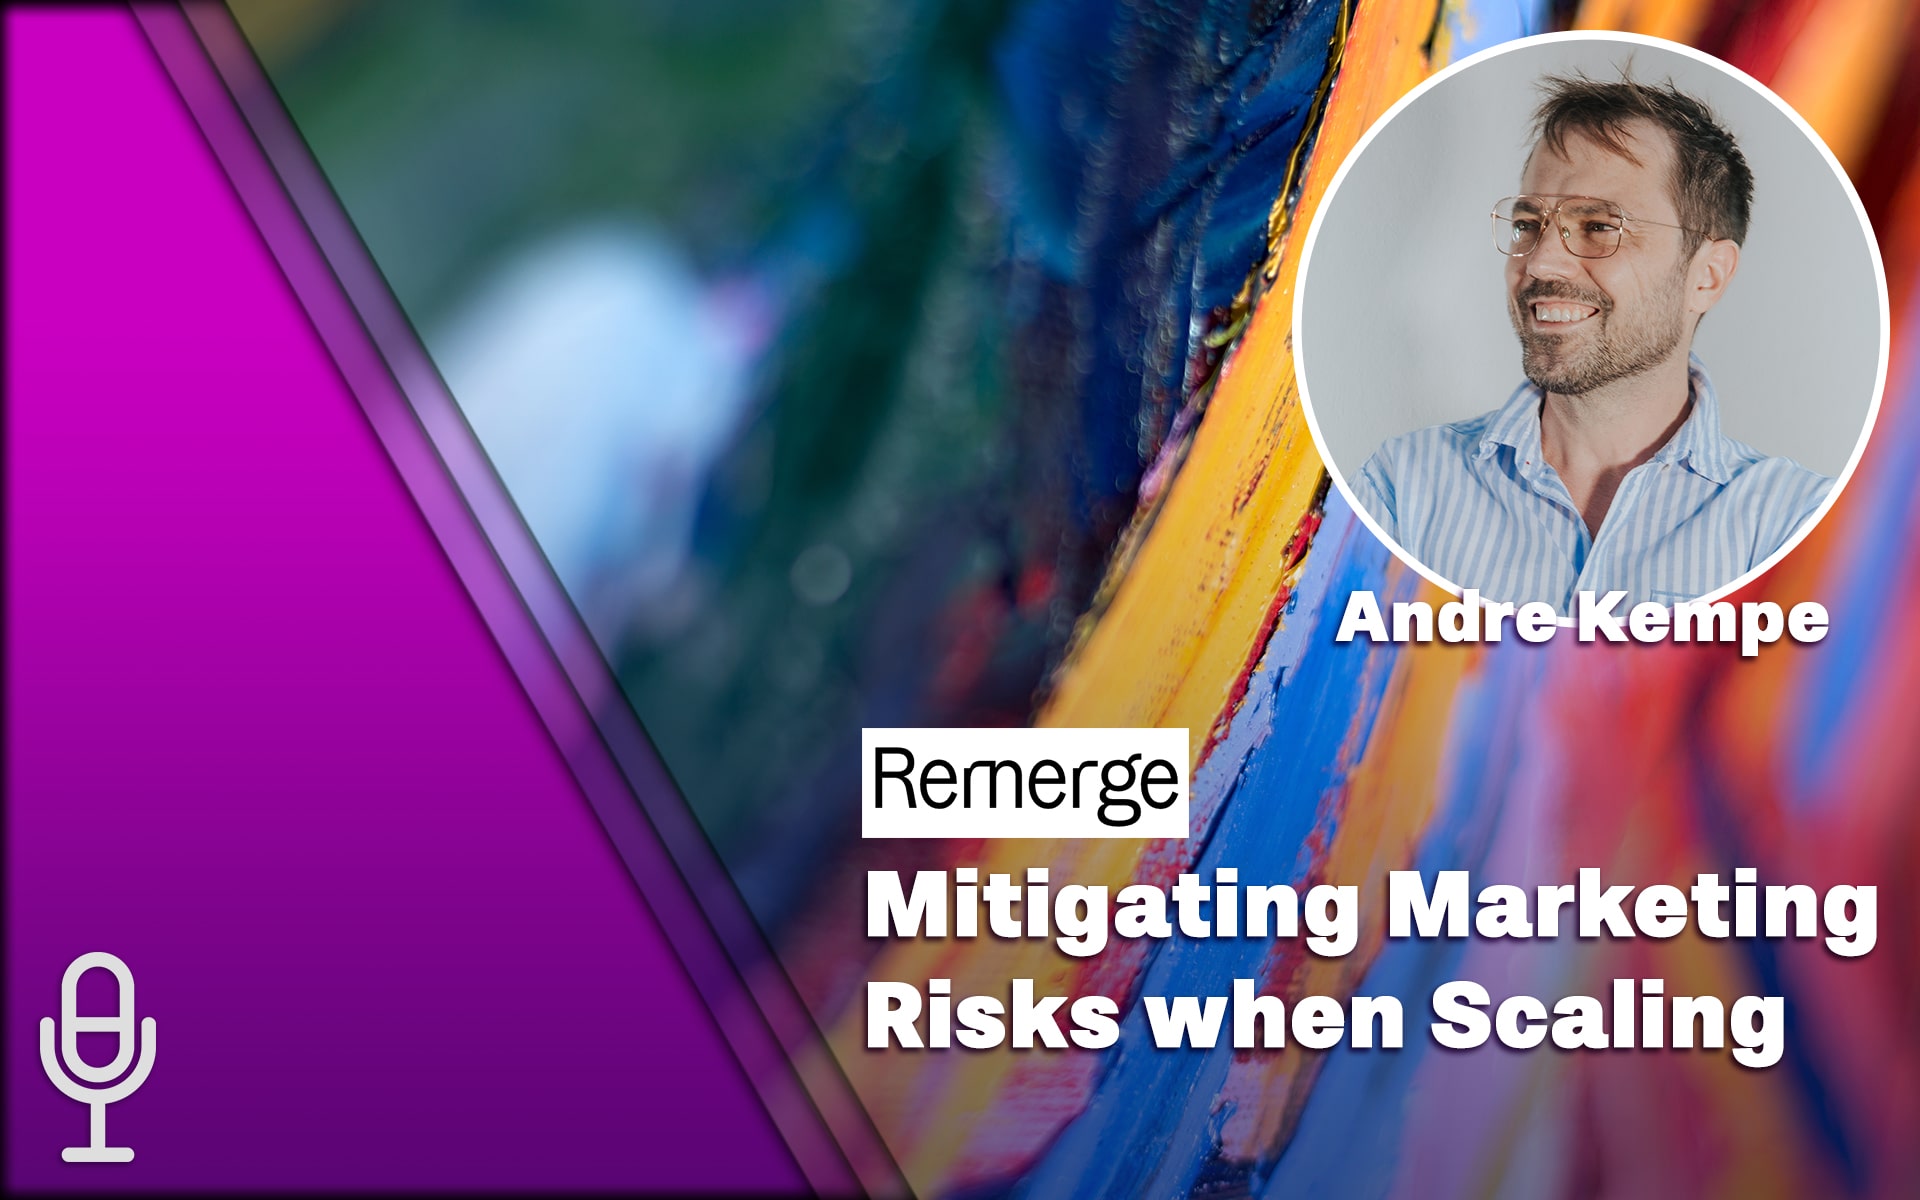 Mitigating Marketing Risks when Scaling - with Andre Kempe